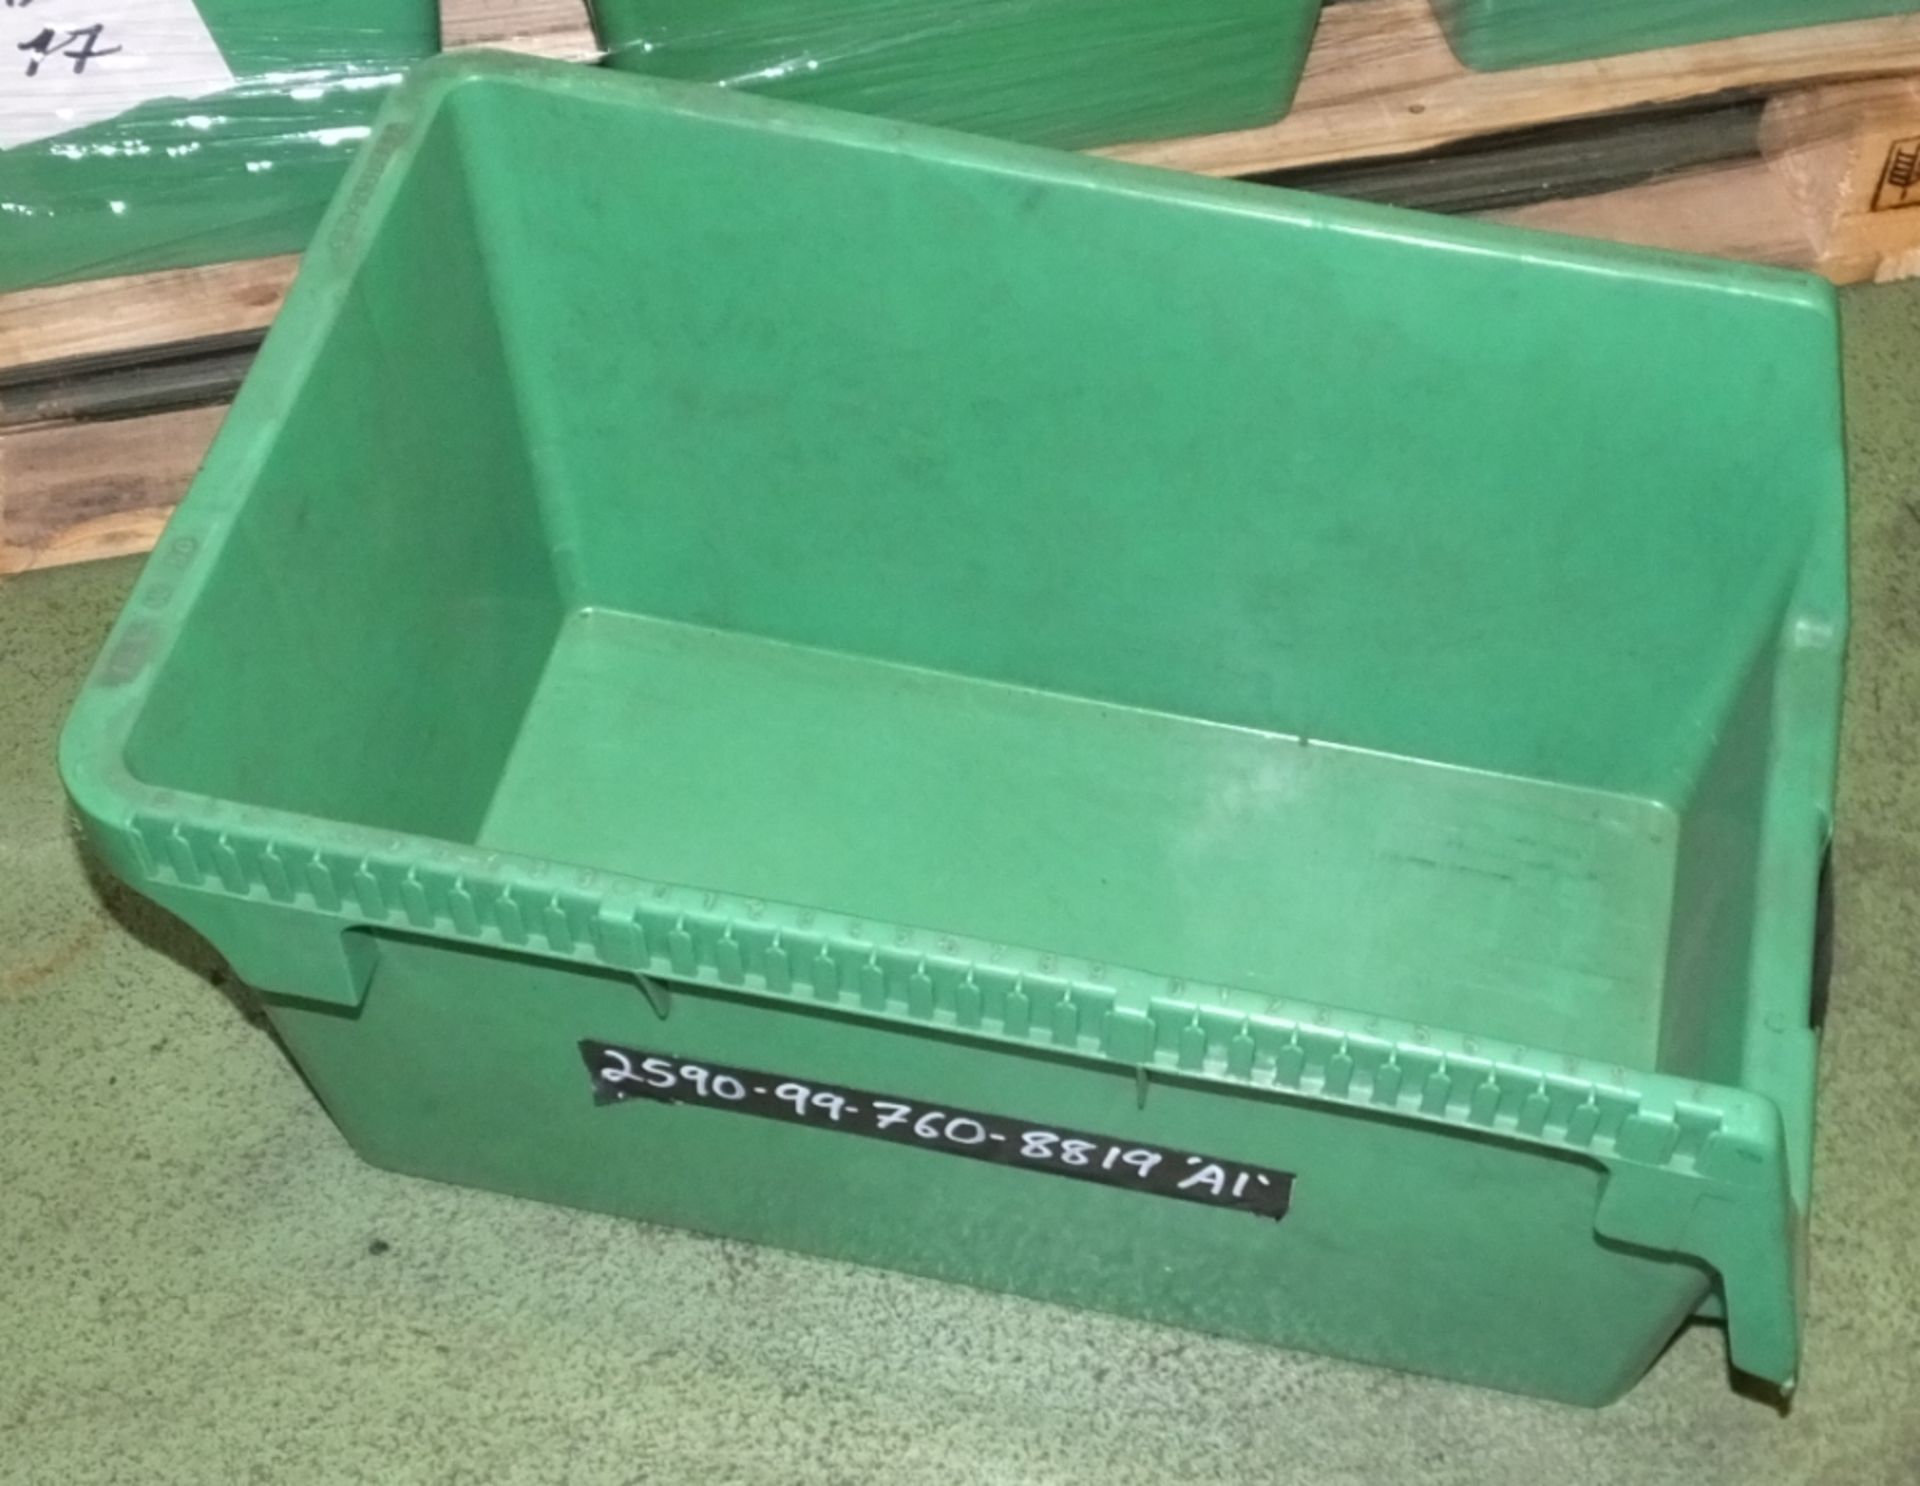 49x Plastic storage bins / trays - non stackable - Image 2 of 2